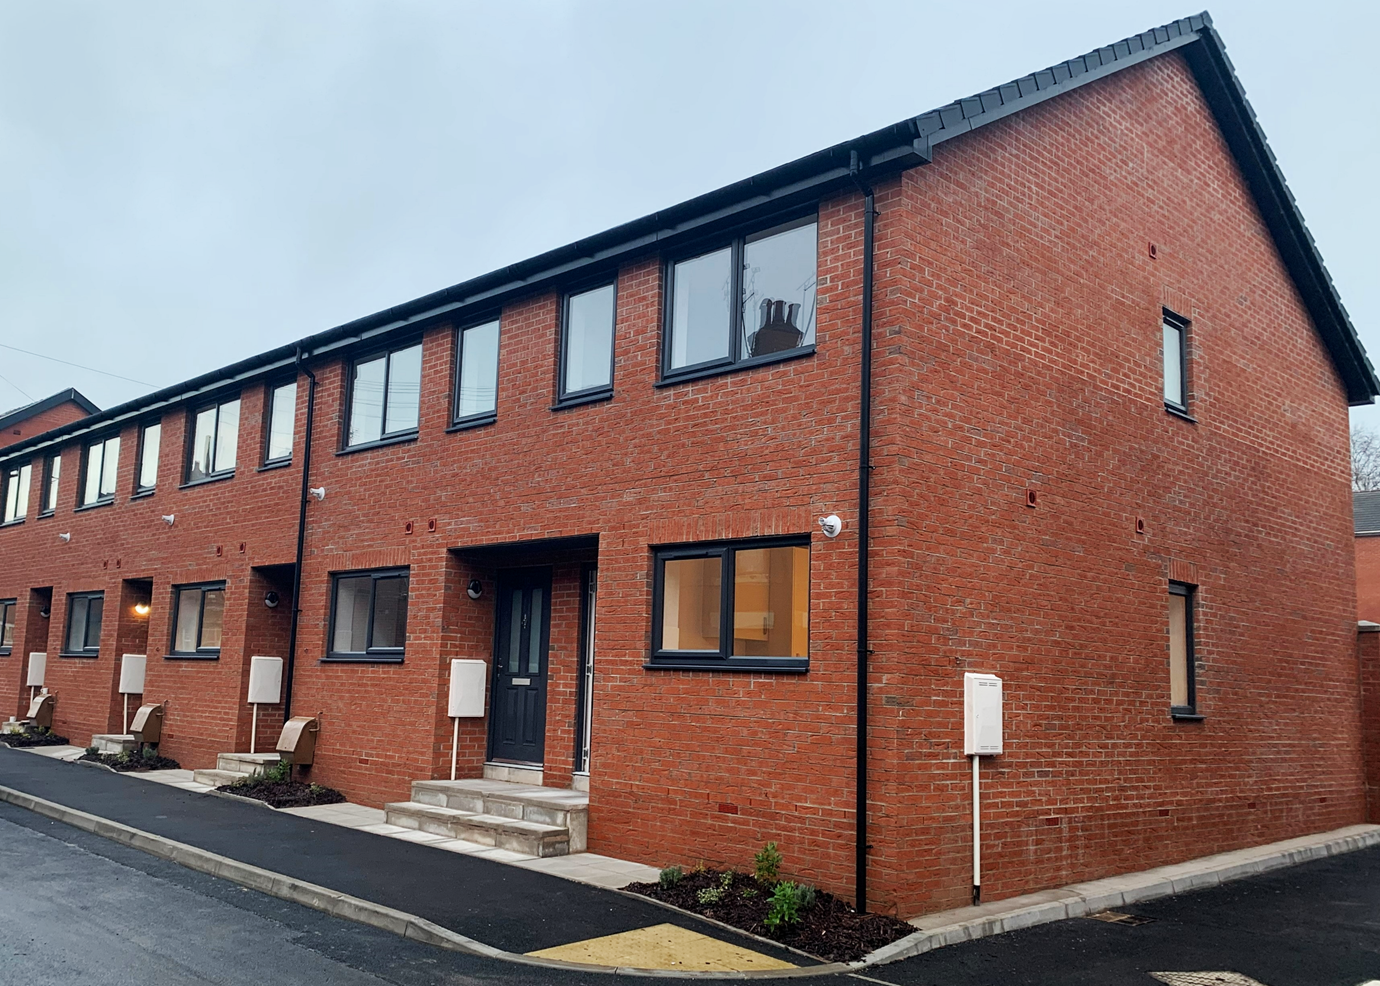 We've transformed a former brownfield site and bring 20 much needed new homes to Littleborough, all for affordable rent.